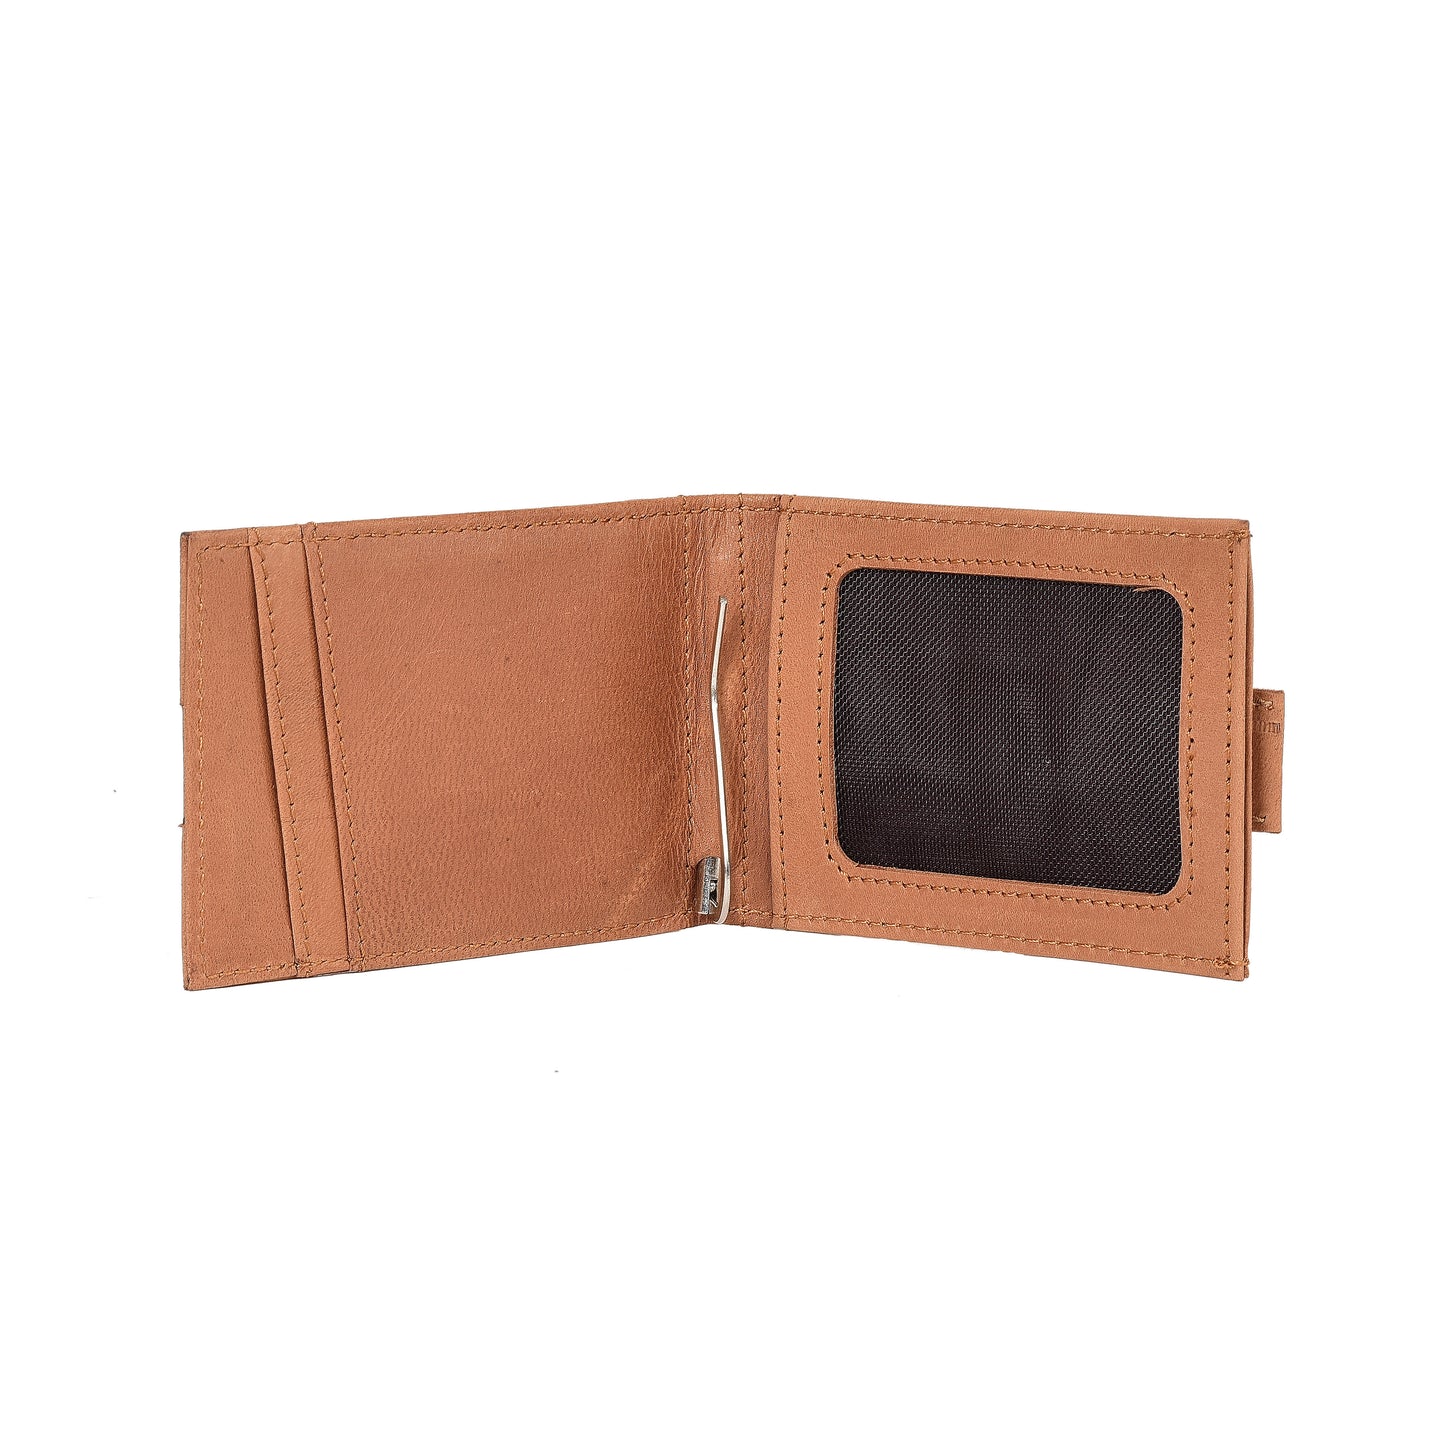 Leather Money Clip Slim Wallet with Credit ATM Card Holder Unisex Card Case